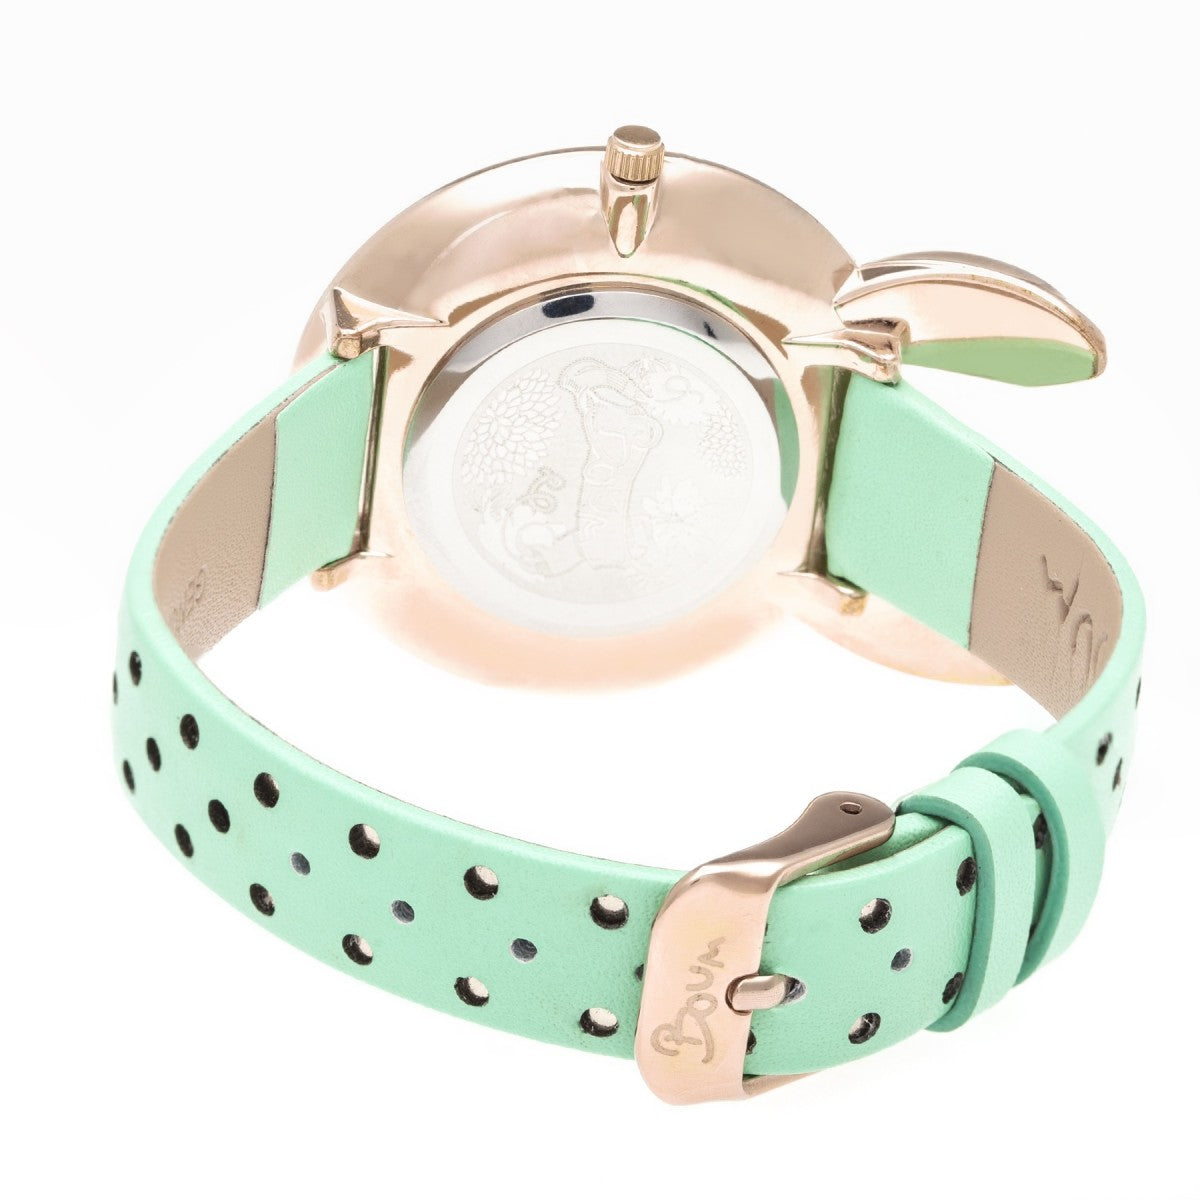 Boum Hotesse Bunny-Accent Leather-Band Watch - Rose Gold/Mint - BOUBM3505